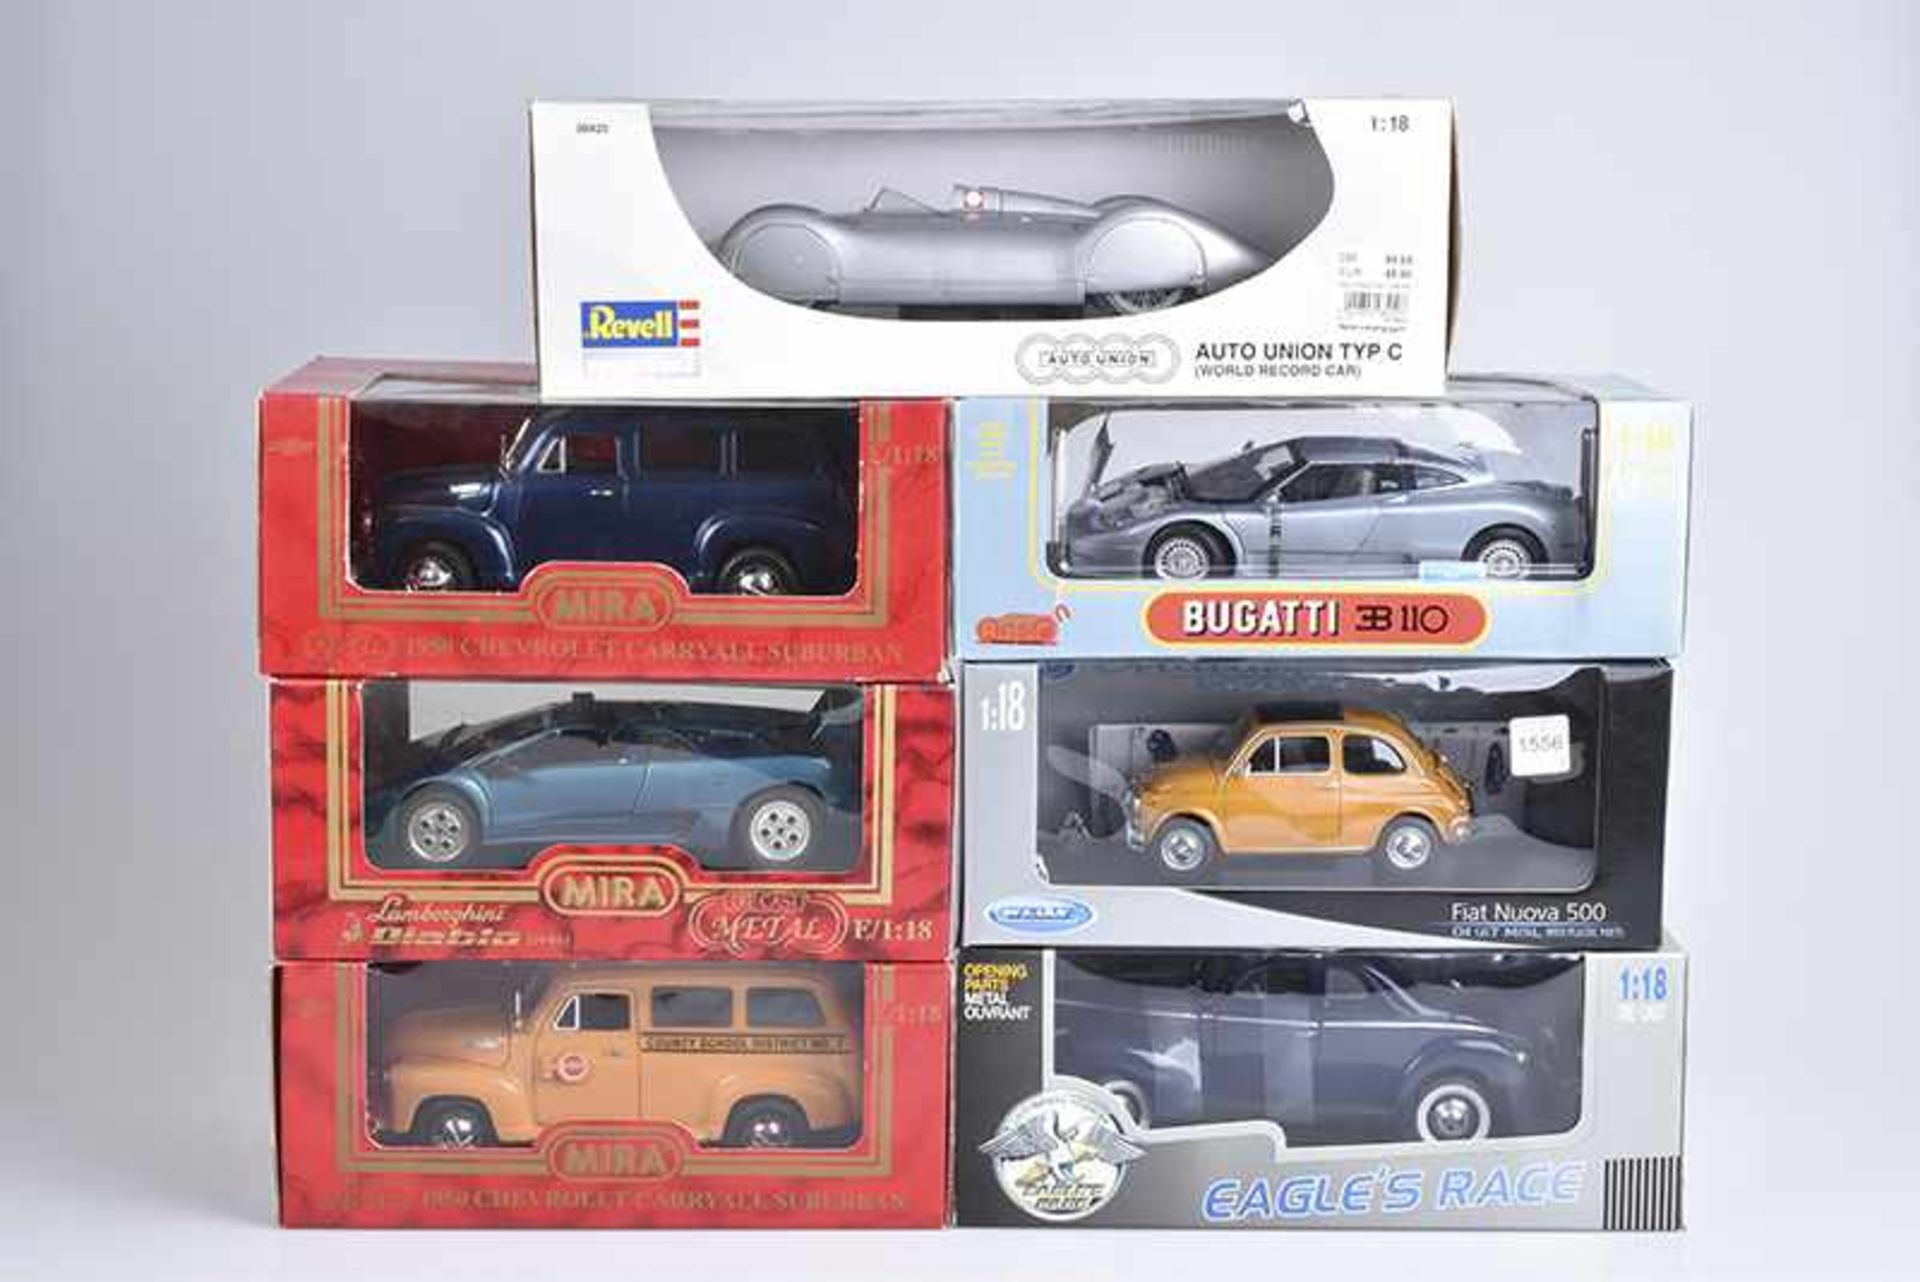 REVELL/ MIRA/ WELLY u.a. 7 Modellautos, Metall, Kunststoffteile, M 1:18, 1940 Ford Deuxe Coupe,